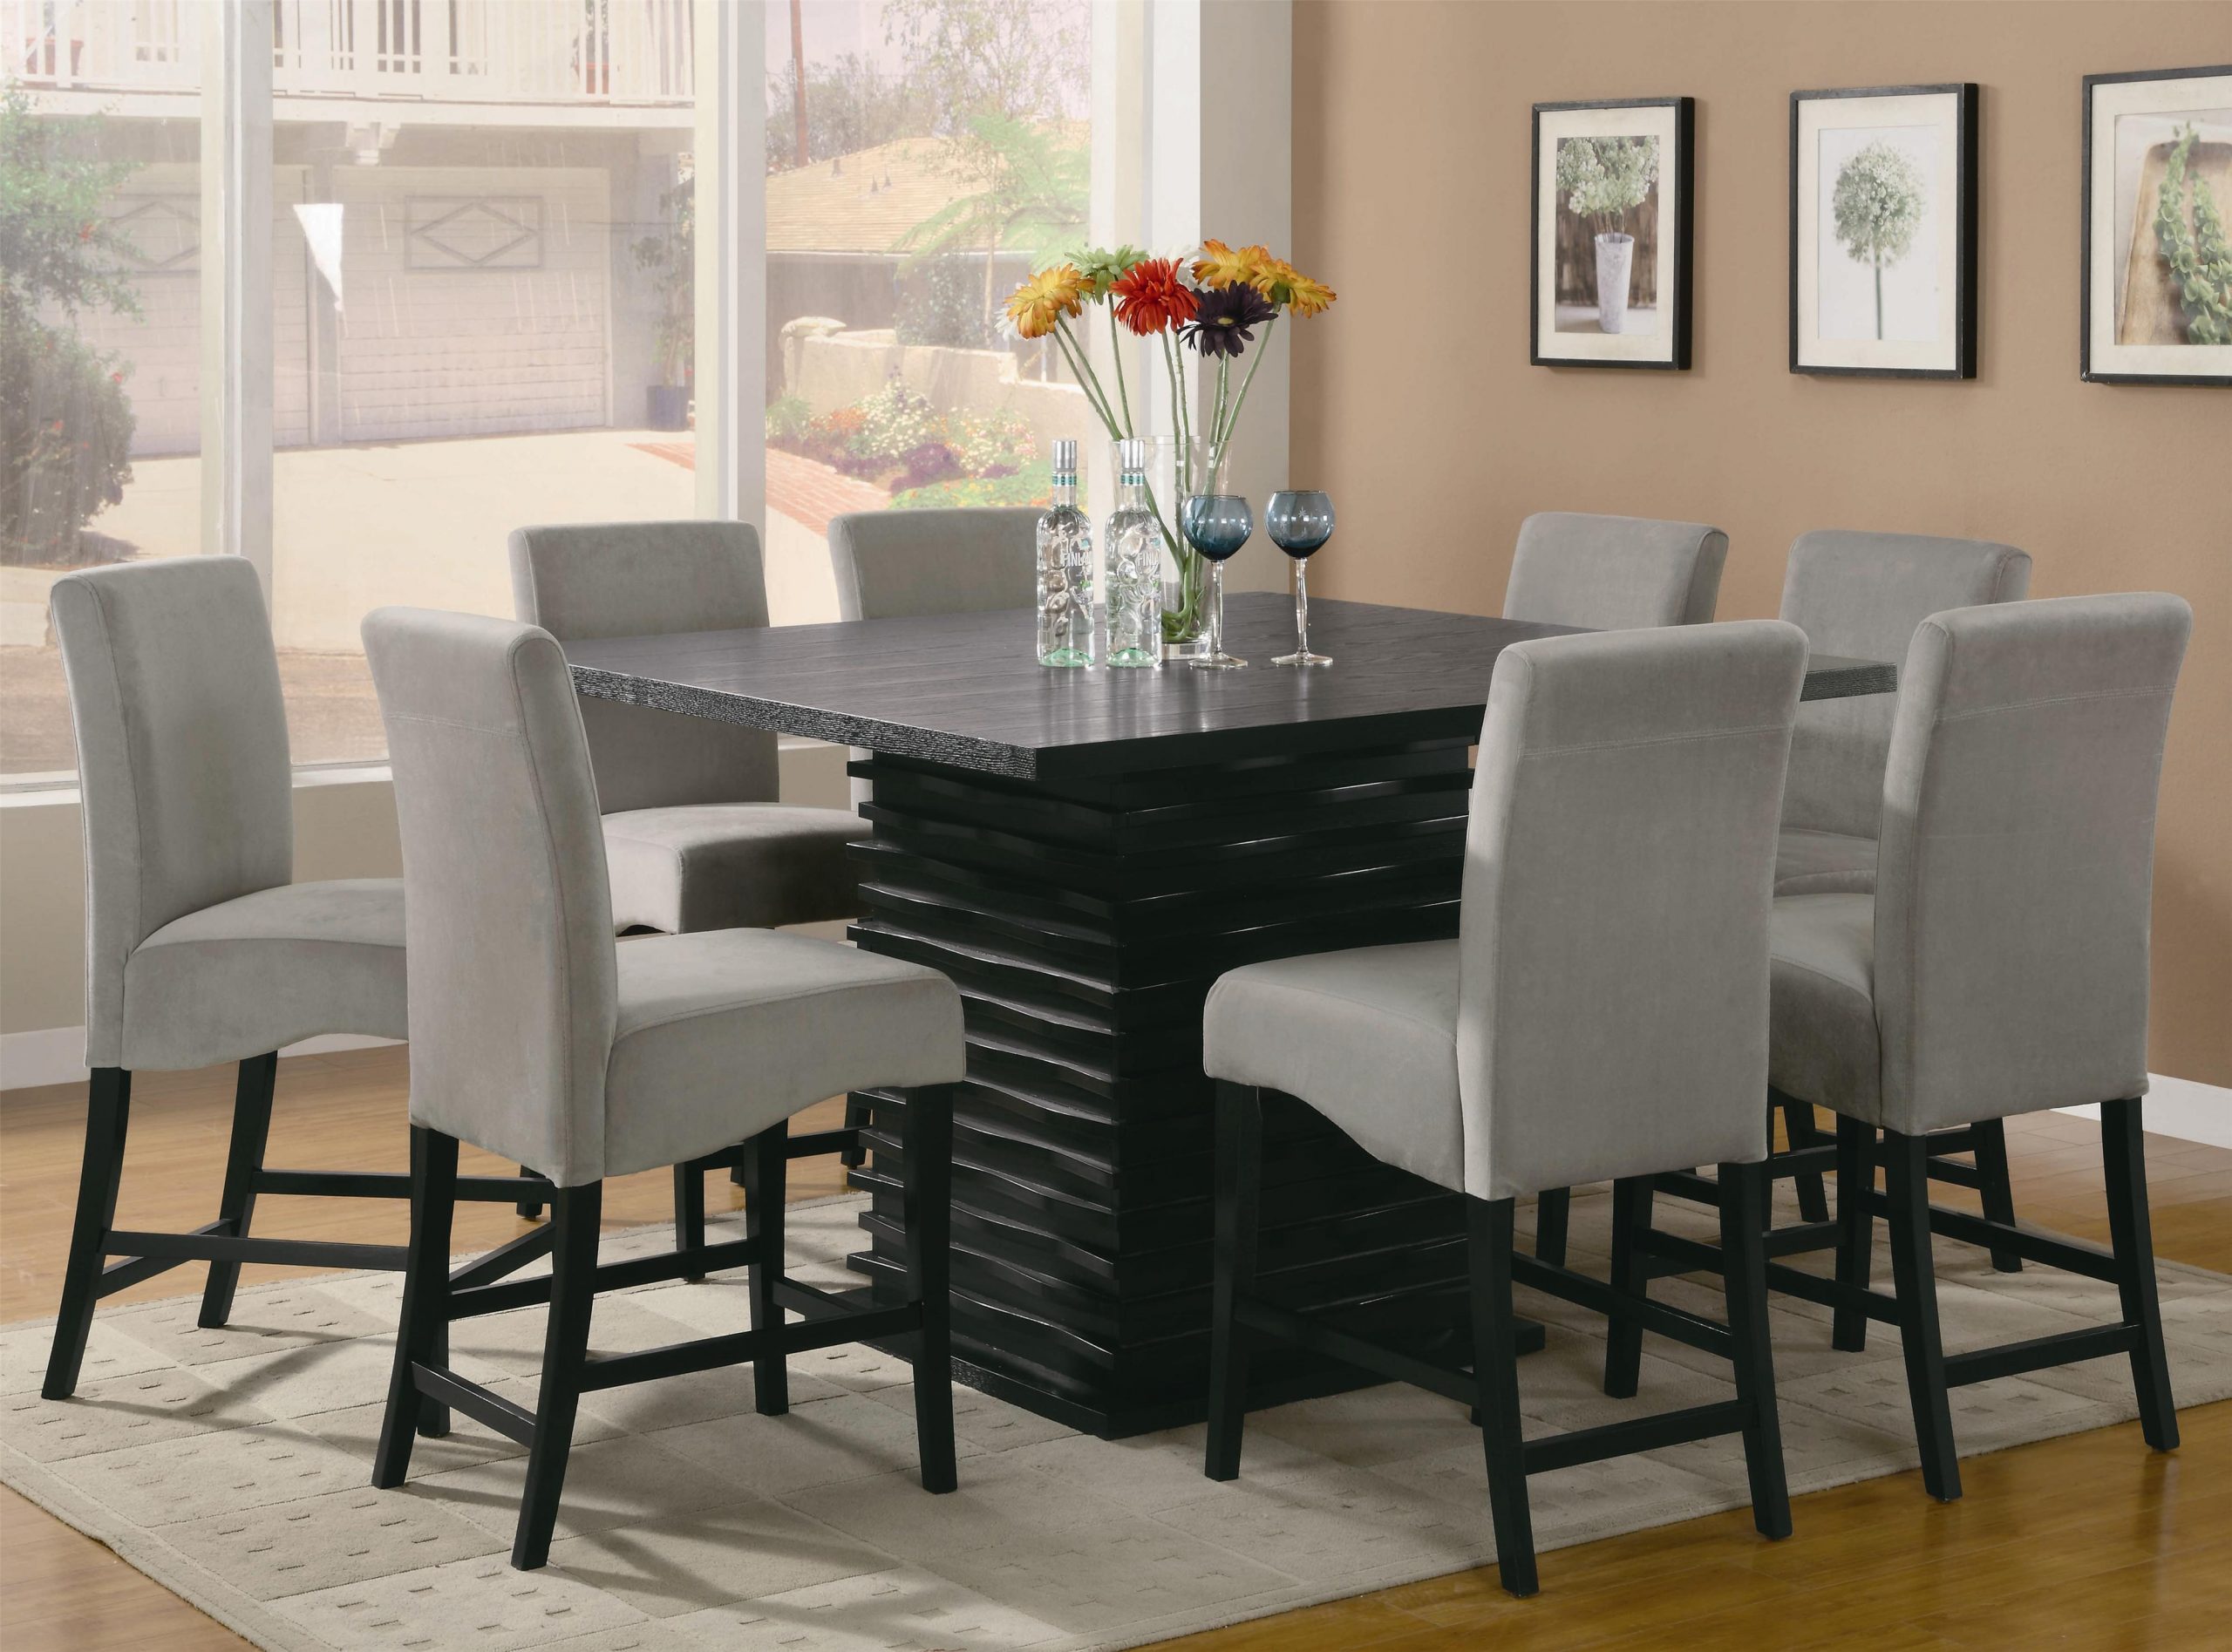 Coaster Stanton 9 Piece Table And Chair Set Dunk Bright for dimensions 4000 X 2961